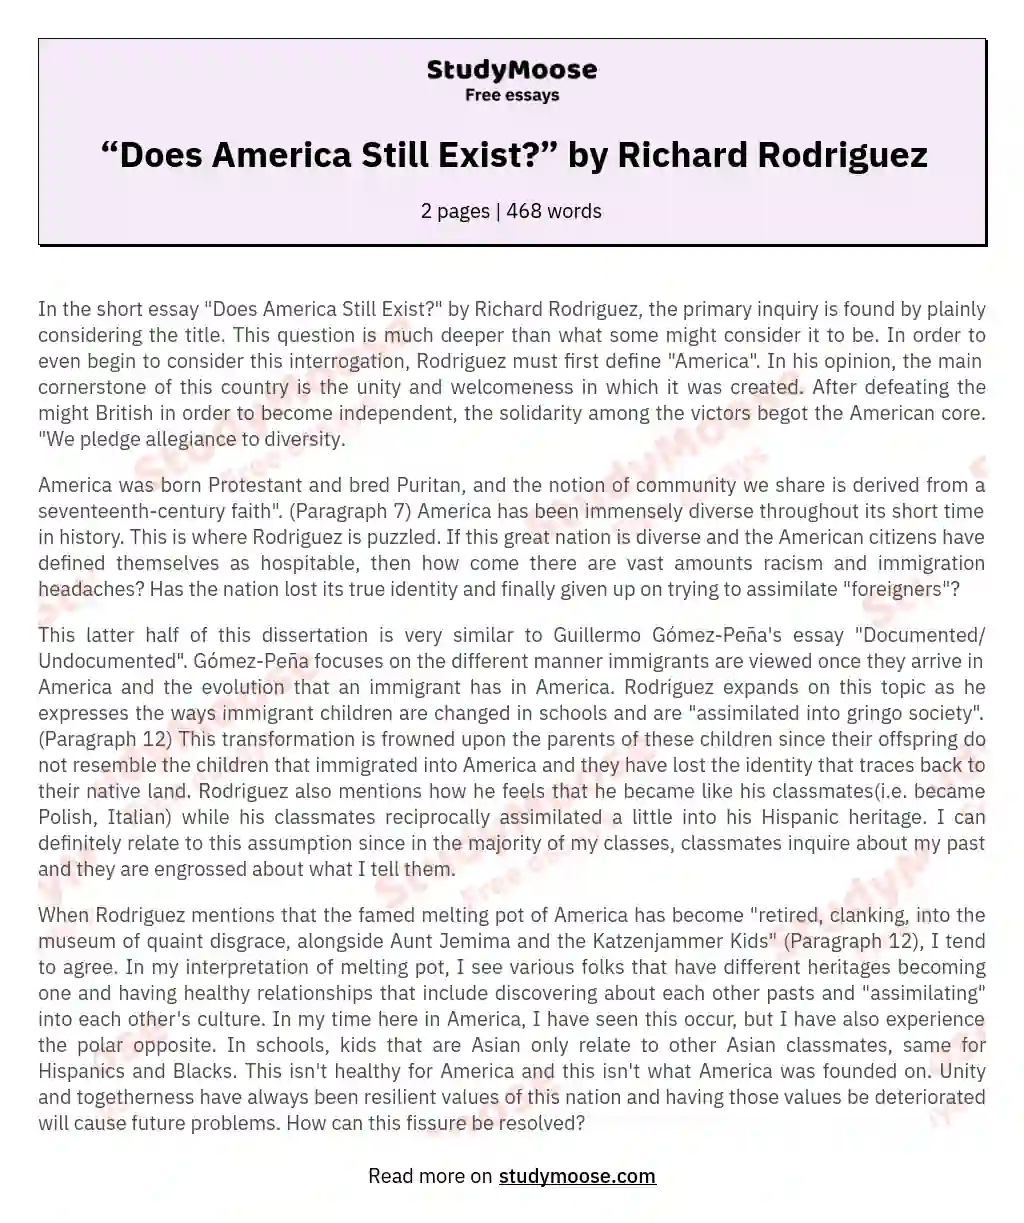 “Does America Still Exist?” by Richard Rodriguez